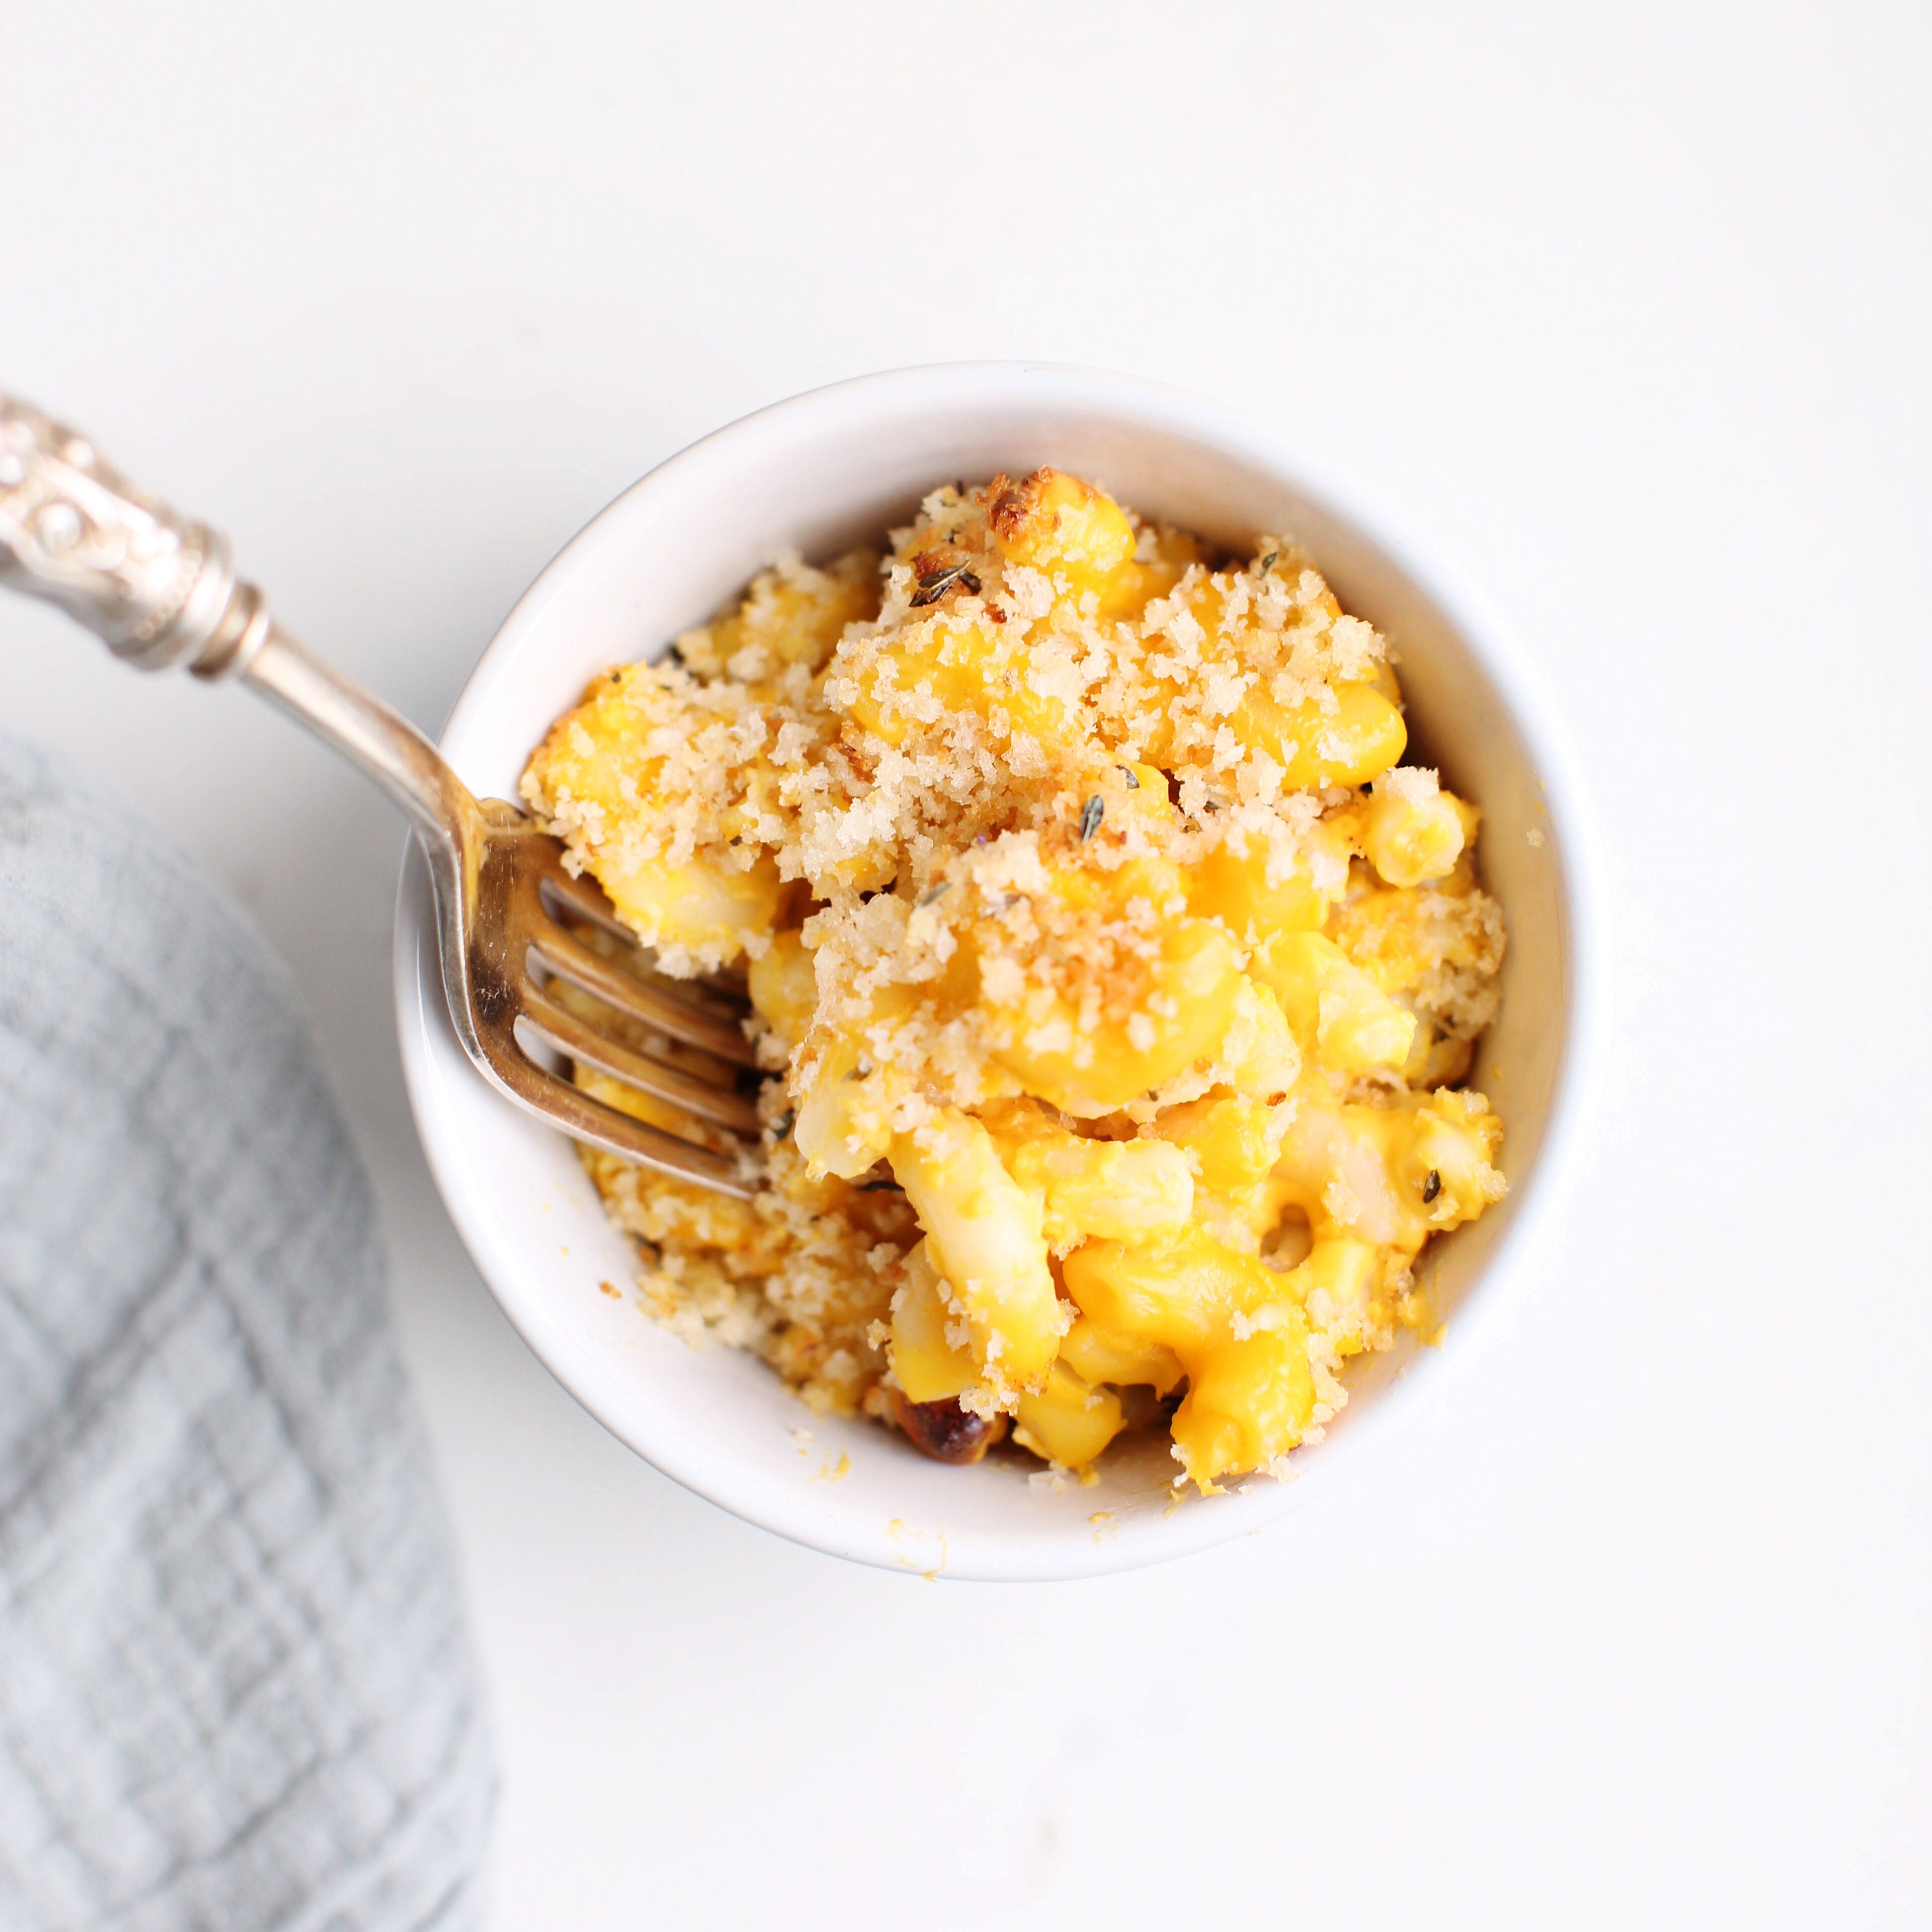 Butternut Squash Macaroni and Cheese made in a blender - so easy with extra nutrition thanks to the squash that is hidden in the sauce!